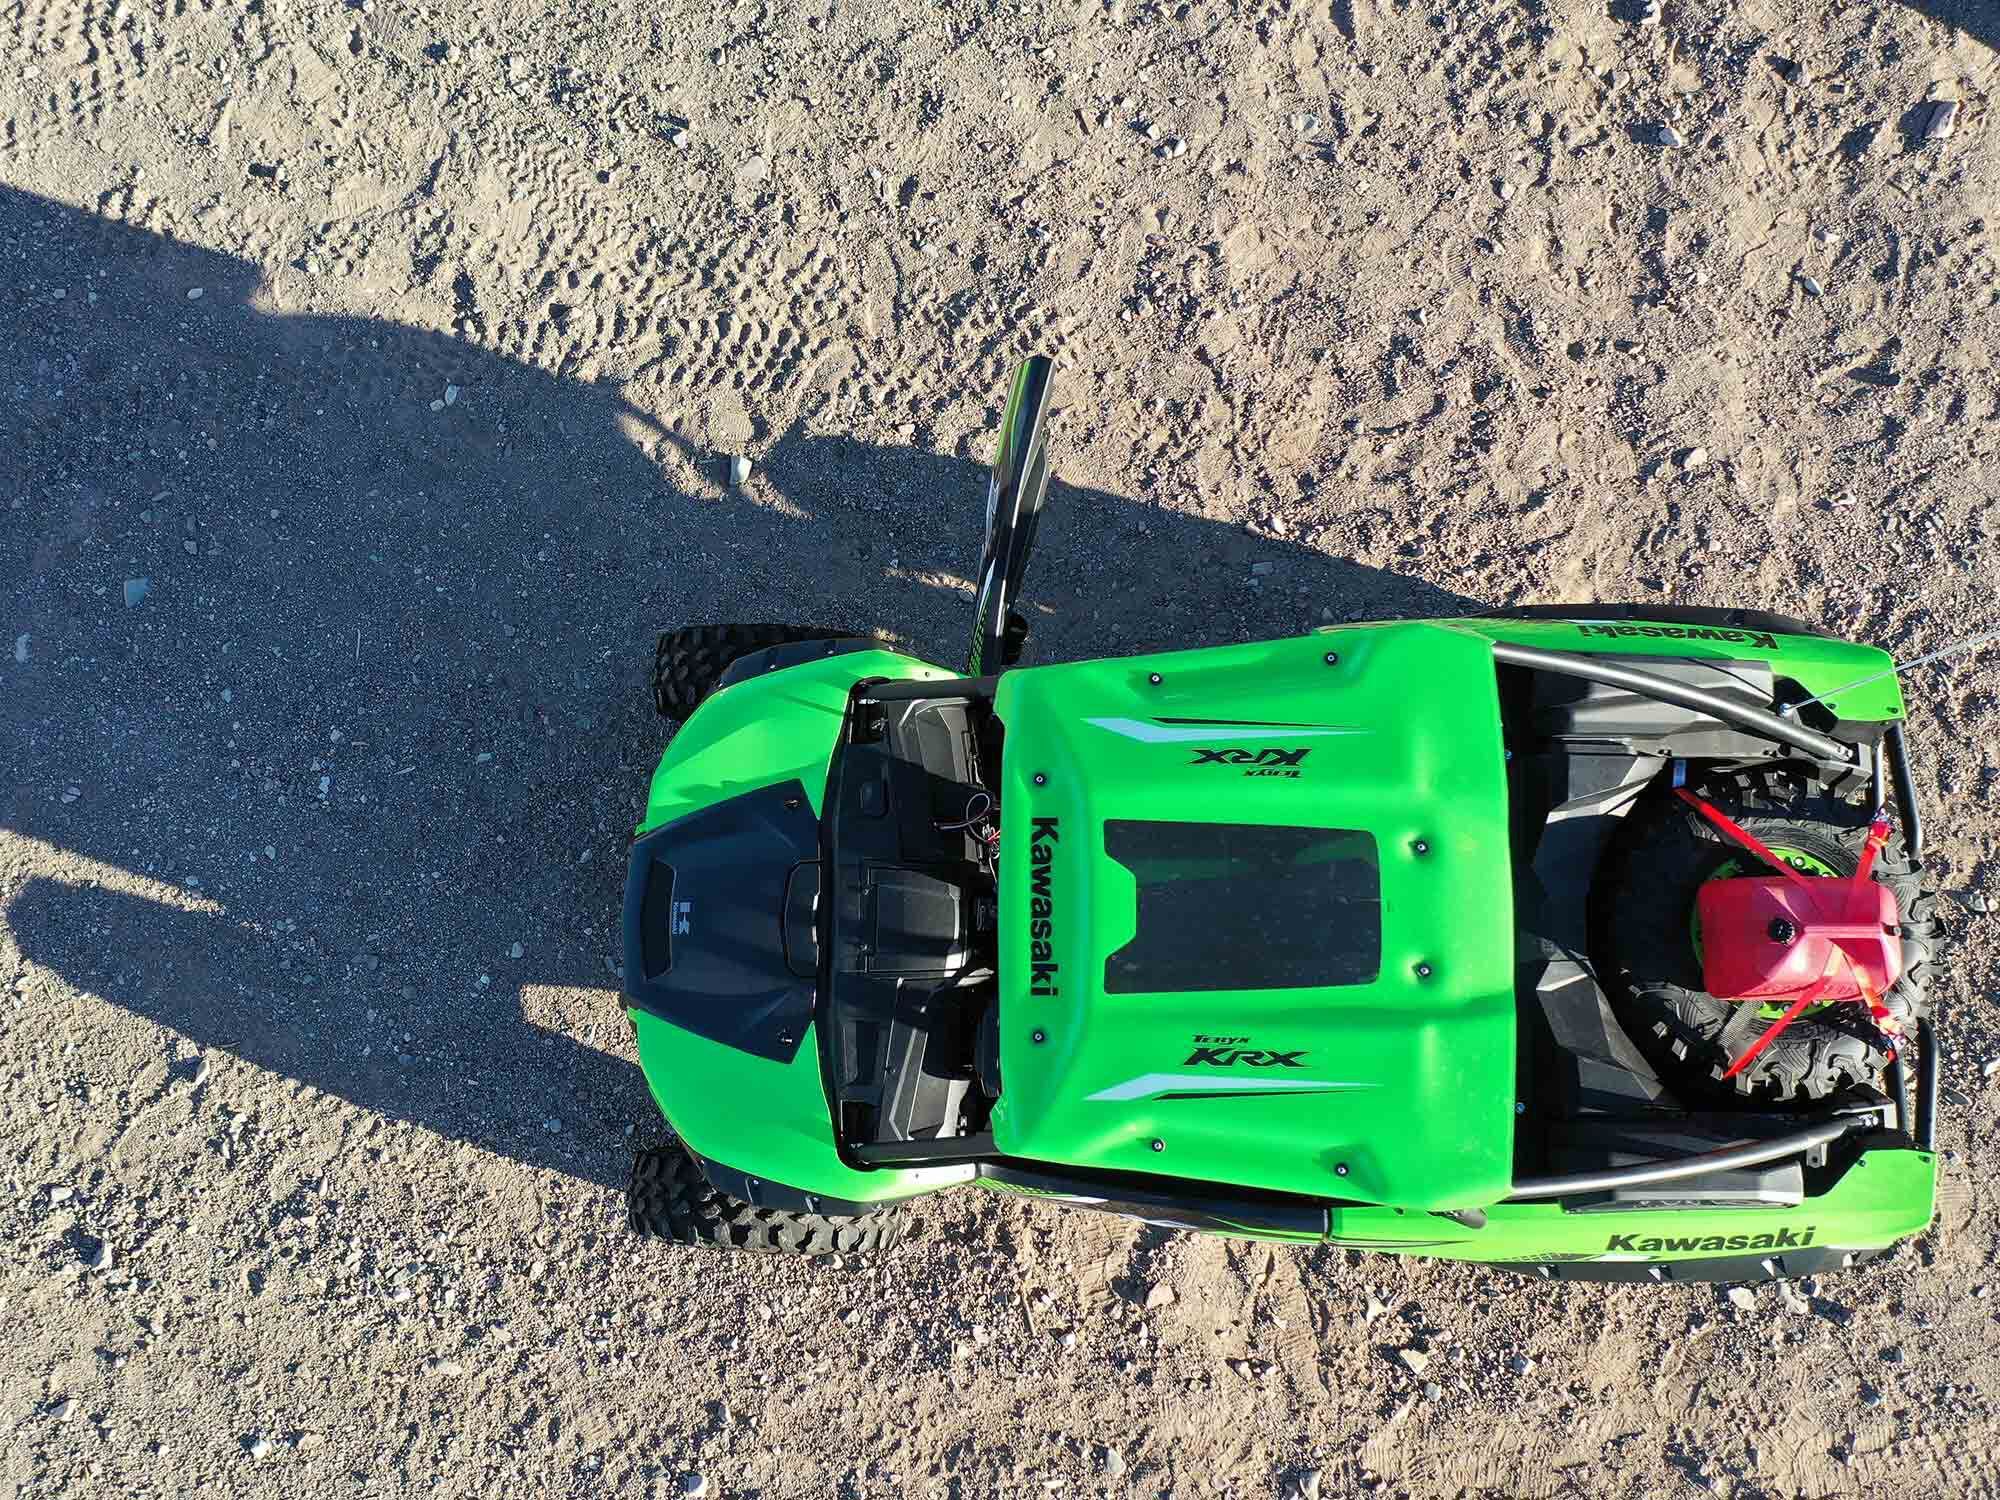 Dimensionally, the Teryx KRX 1000 is about the size of a small Jeep Wrangler from the ’90s and early 2000s. It’s a surprisingly capable machine that’s easy to operate.